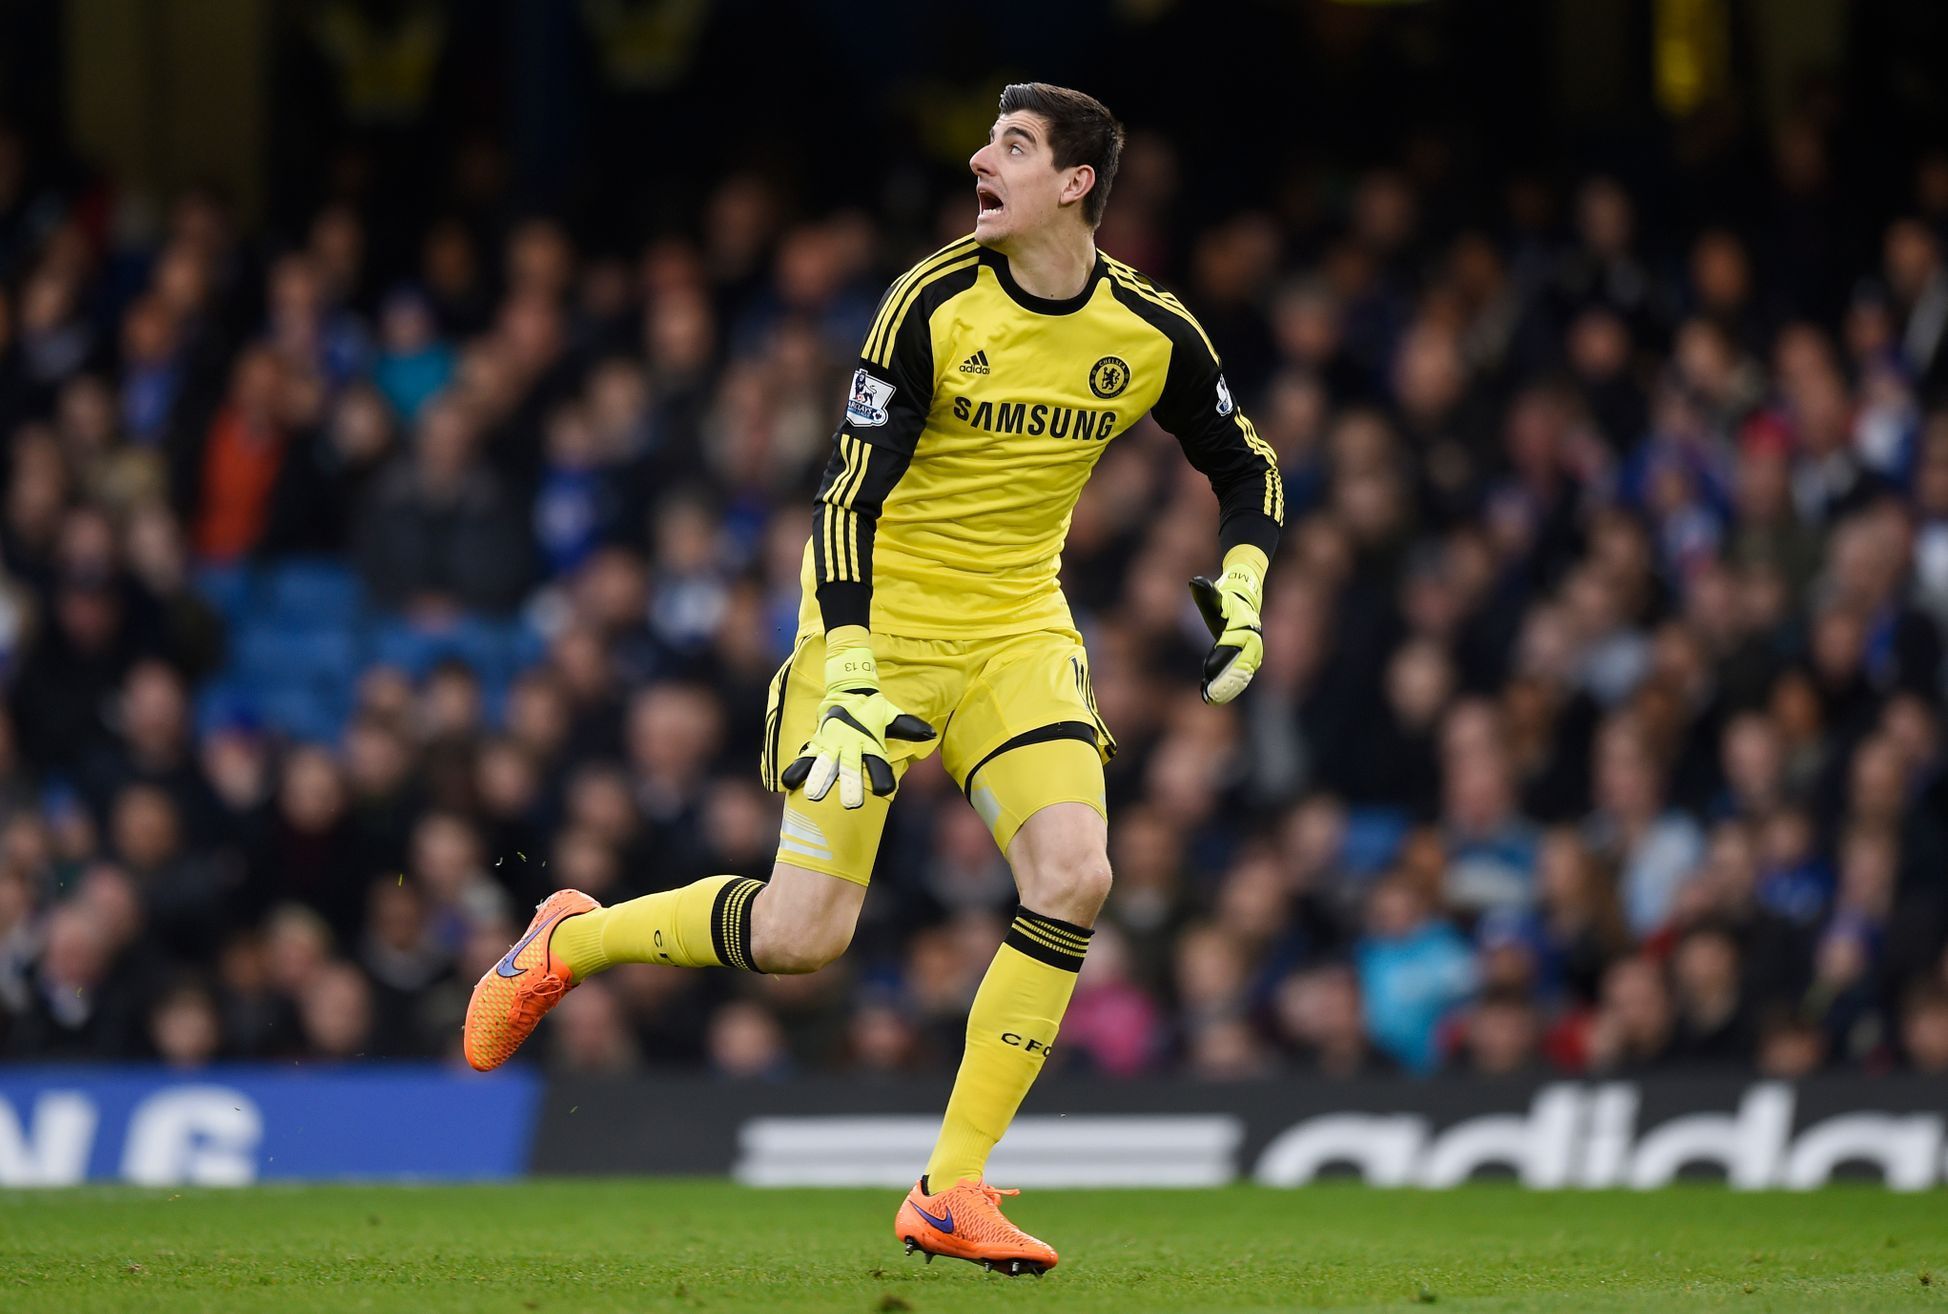 Football: Chelsea's Thibaut Courtois watches the ball as Charlie Adam (not pictured) scores the first goal for Stoke